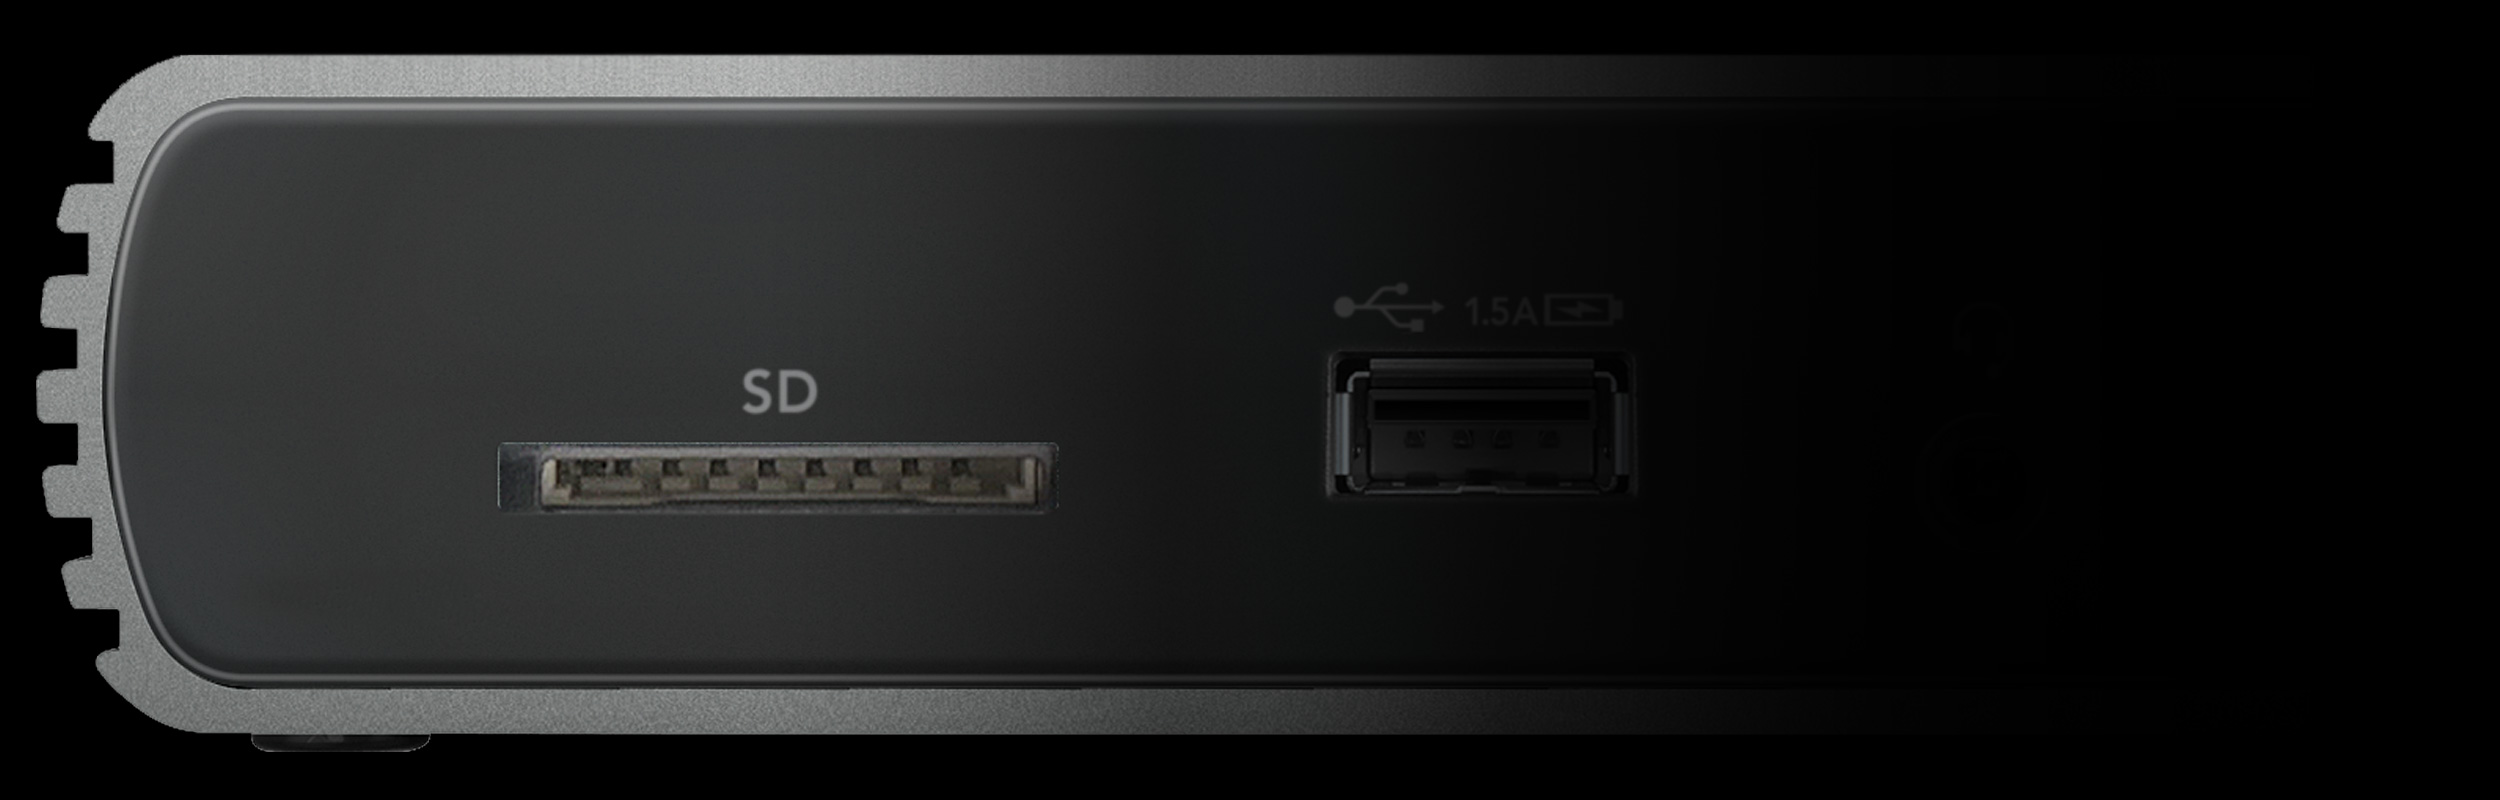 Echo 11 Dock Features Fast UHS-II SD 4.0 Port